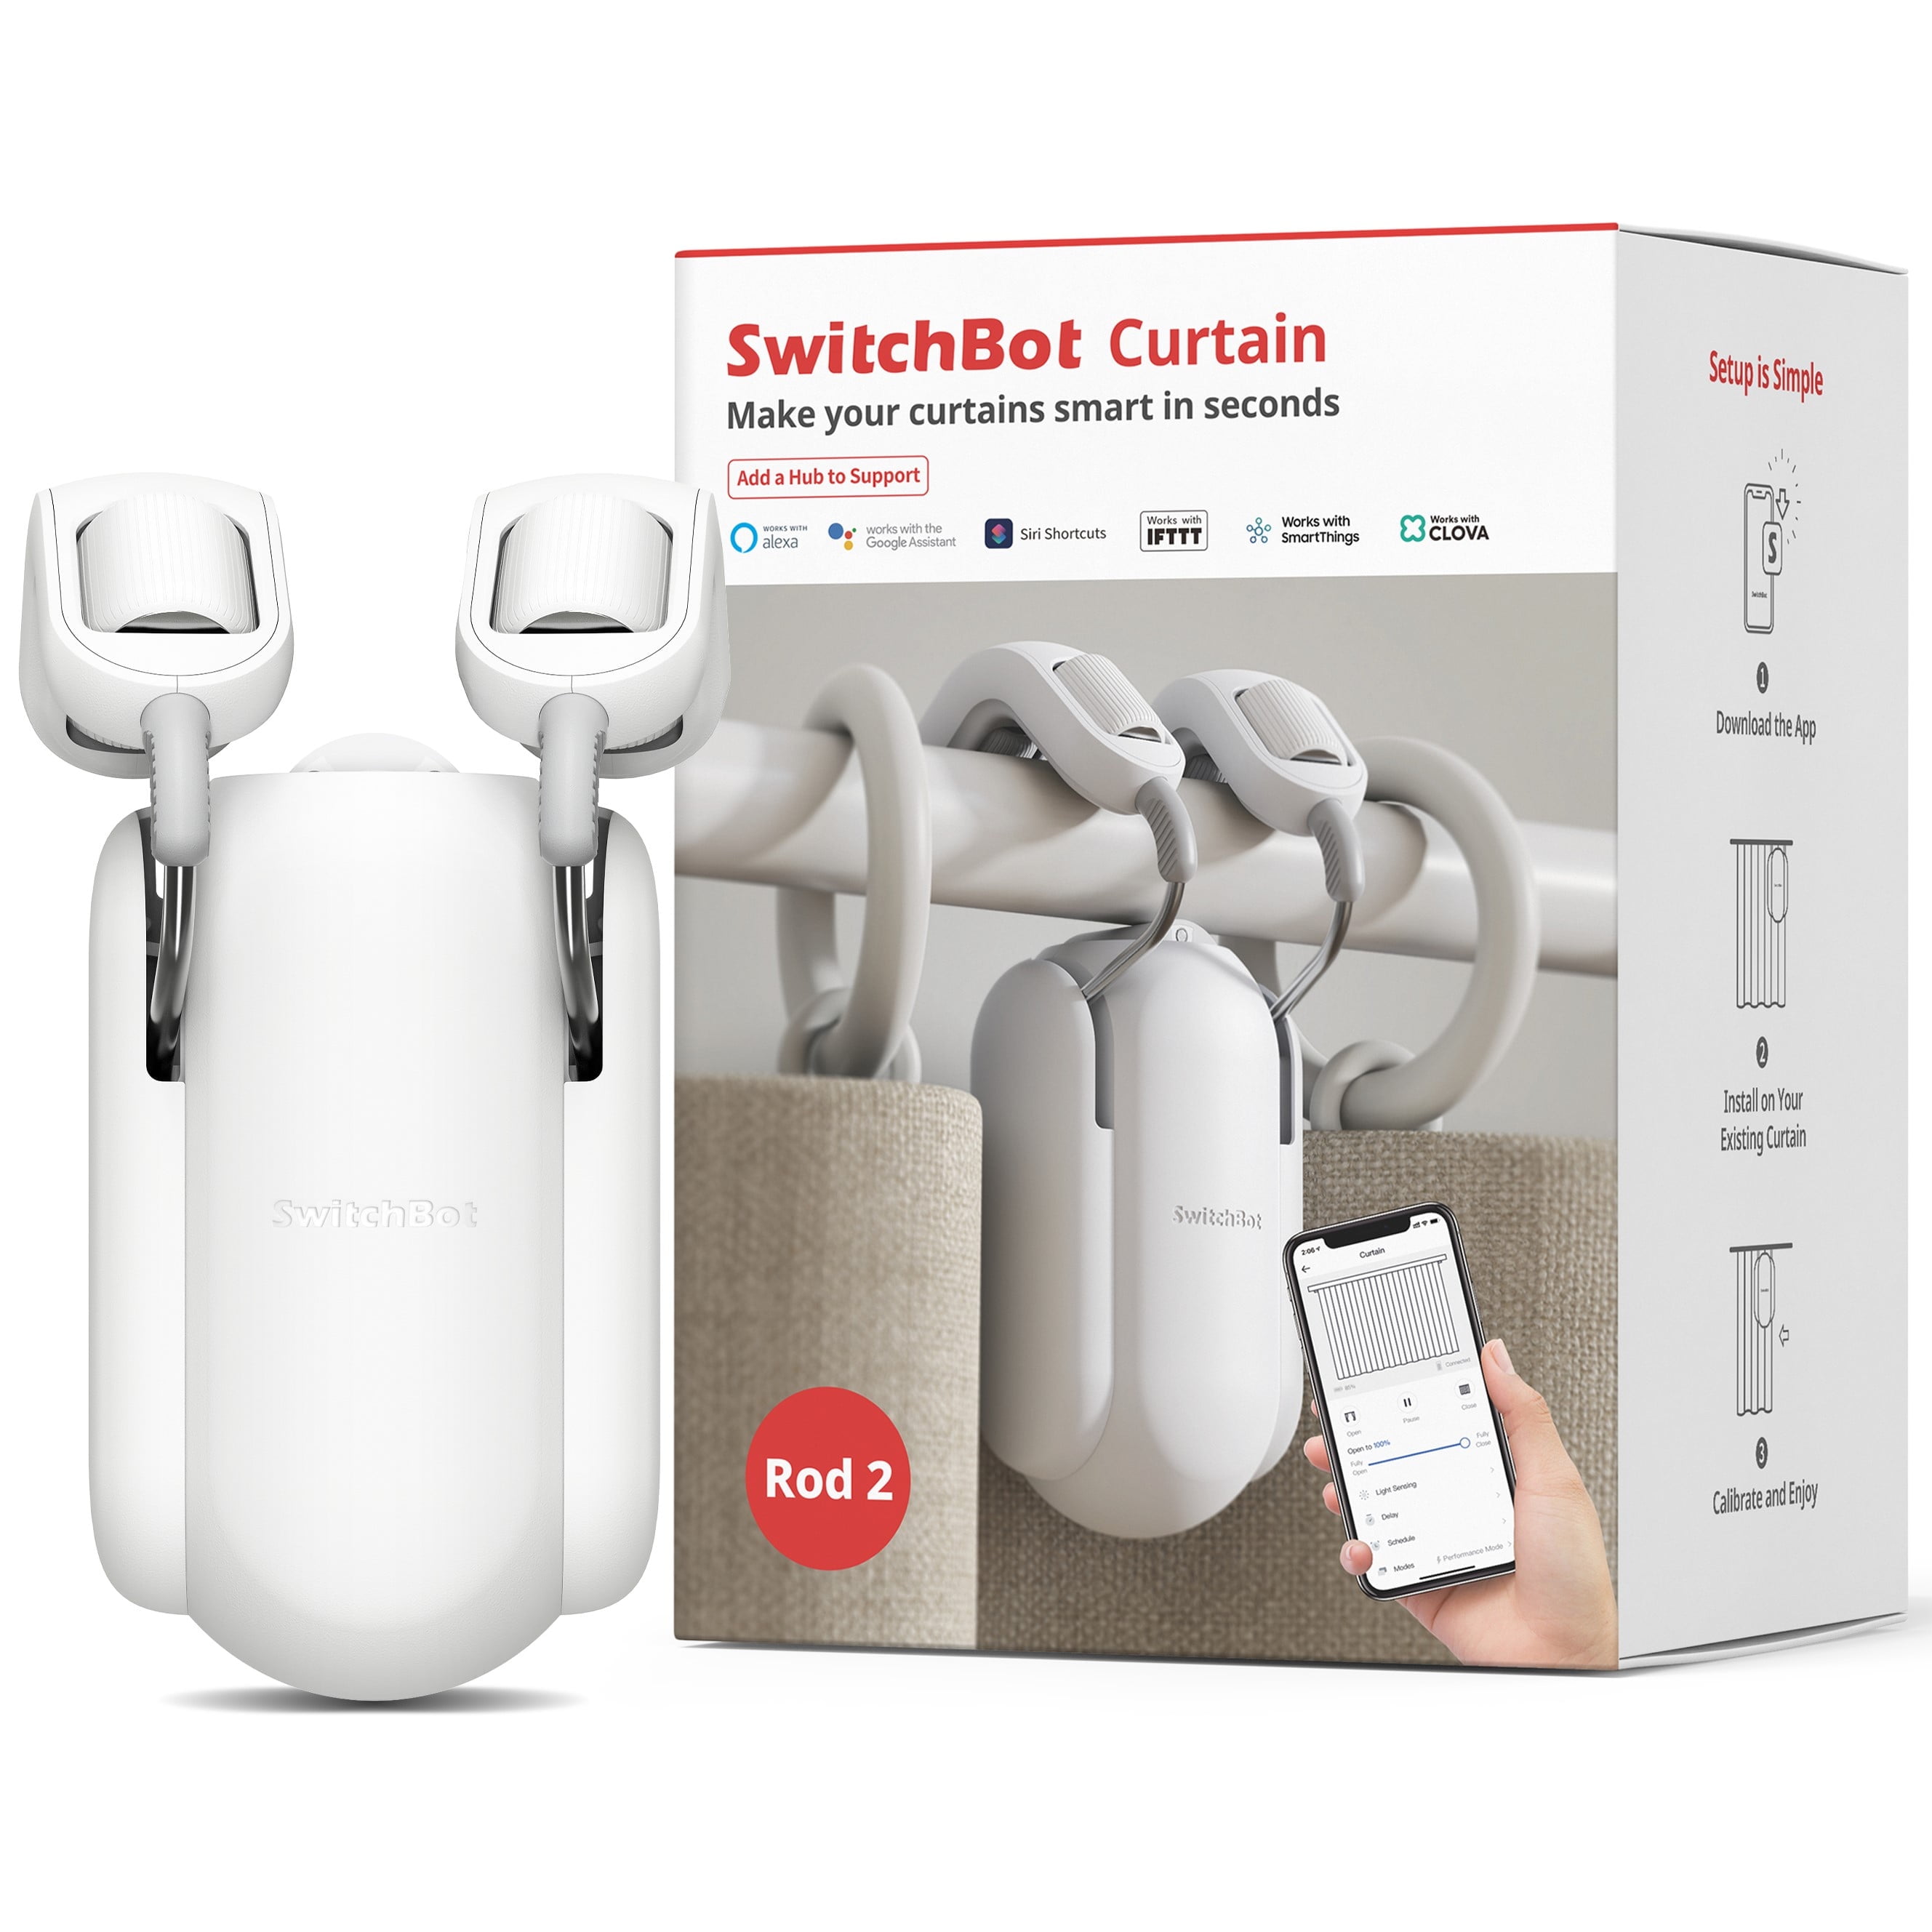 SwitchBot Curtain Robot Version 2 review – A great product made even  better! - The Gadgeteer